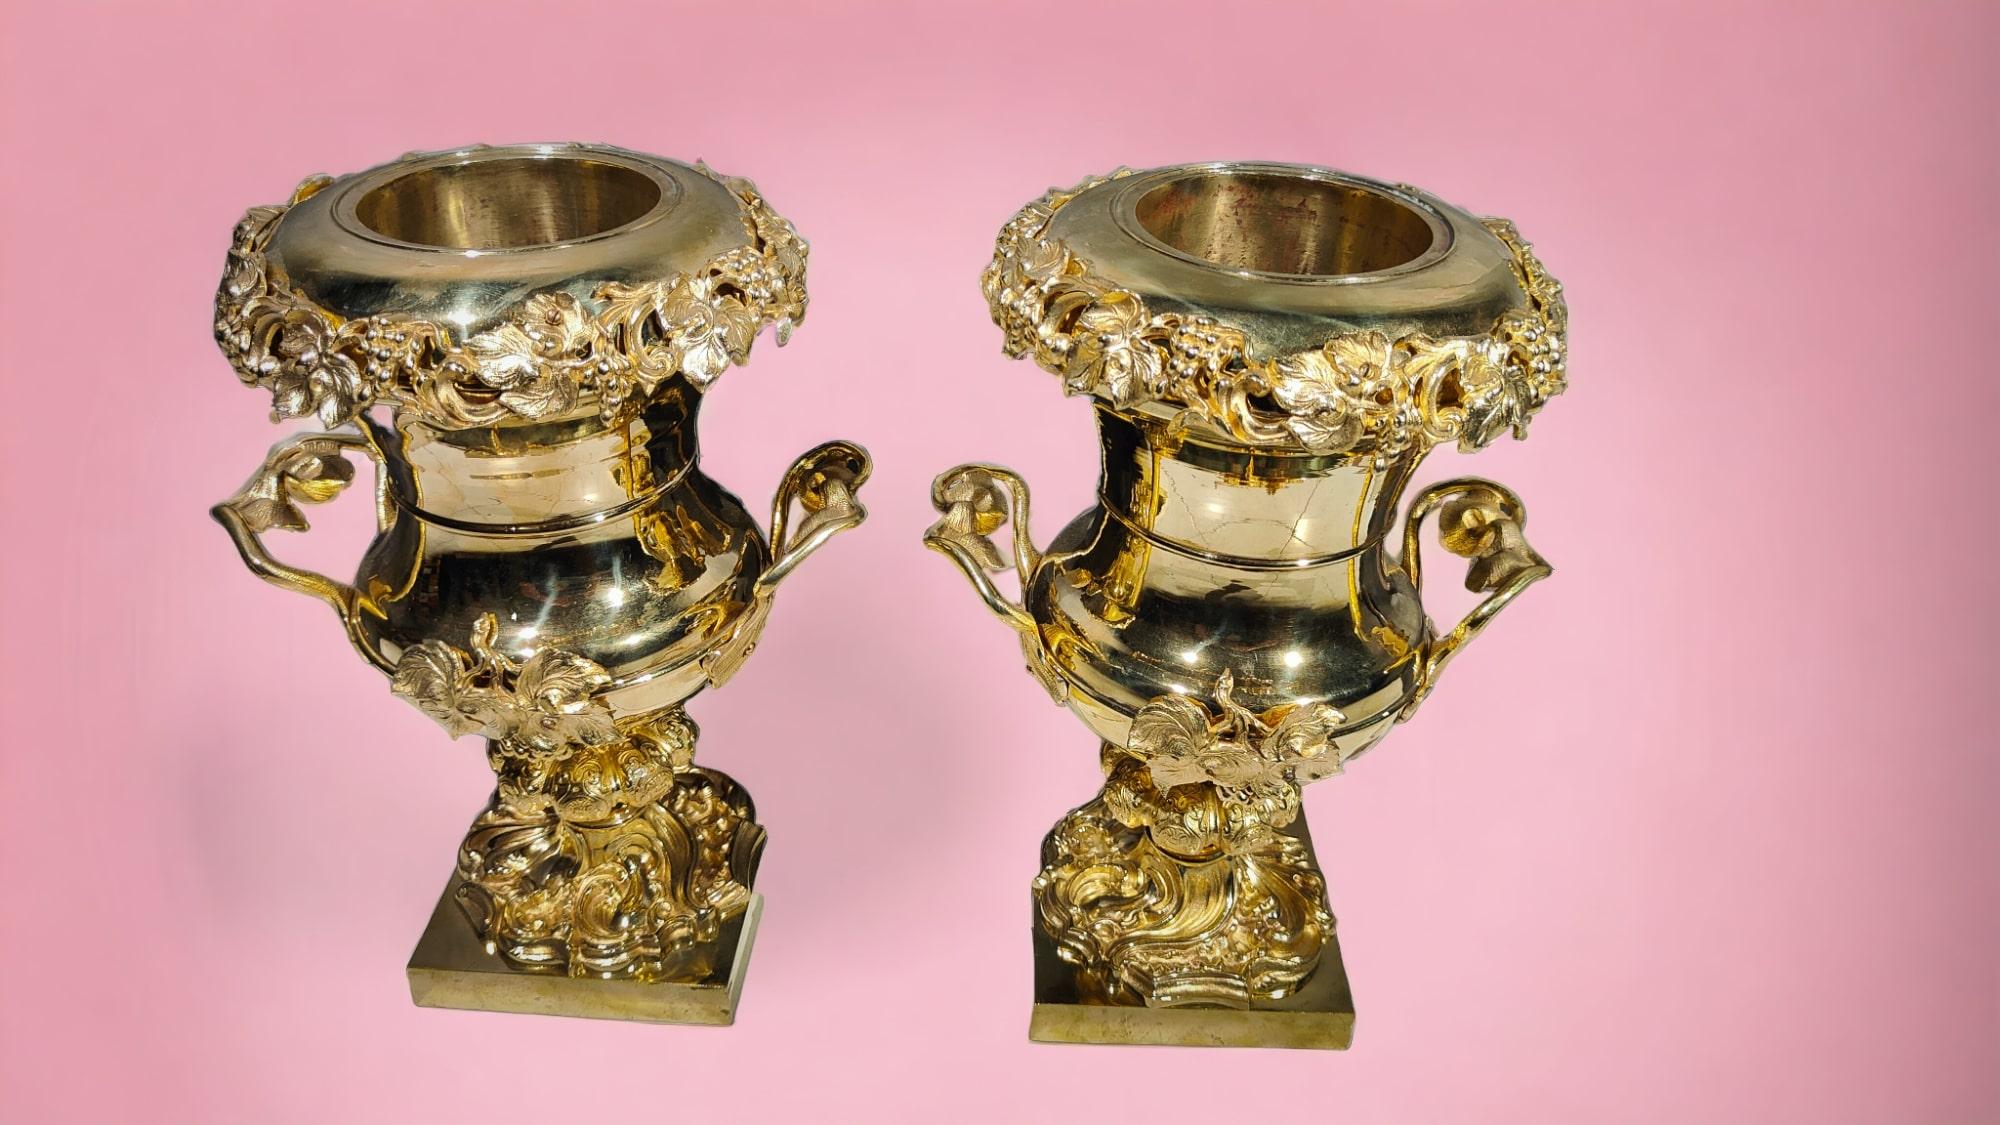 Pair Of Gilt Bronze Cups From The 19th Century
Large pair of gilded bronze cups from the 19th century. Good condition. Dimensions: 40x28x20 cm